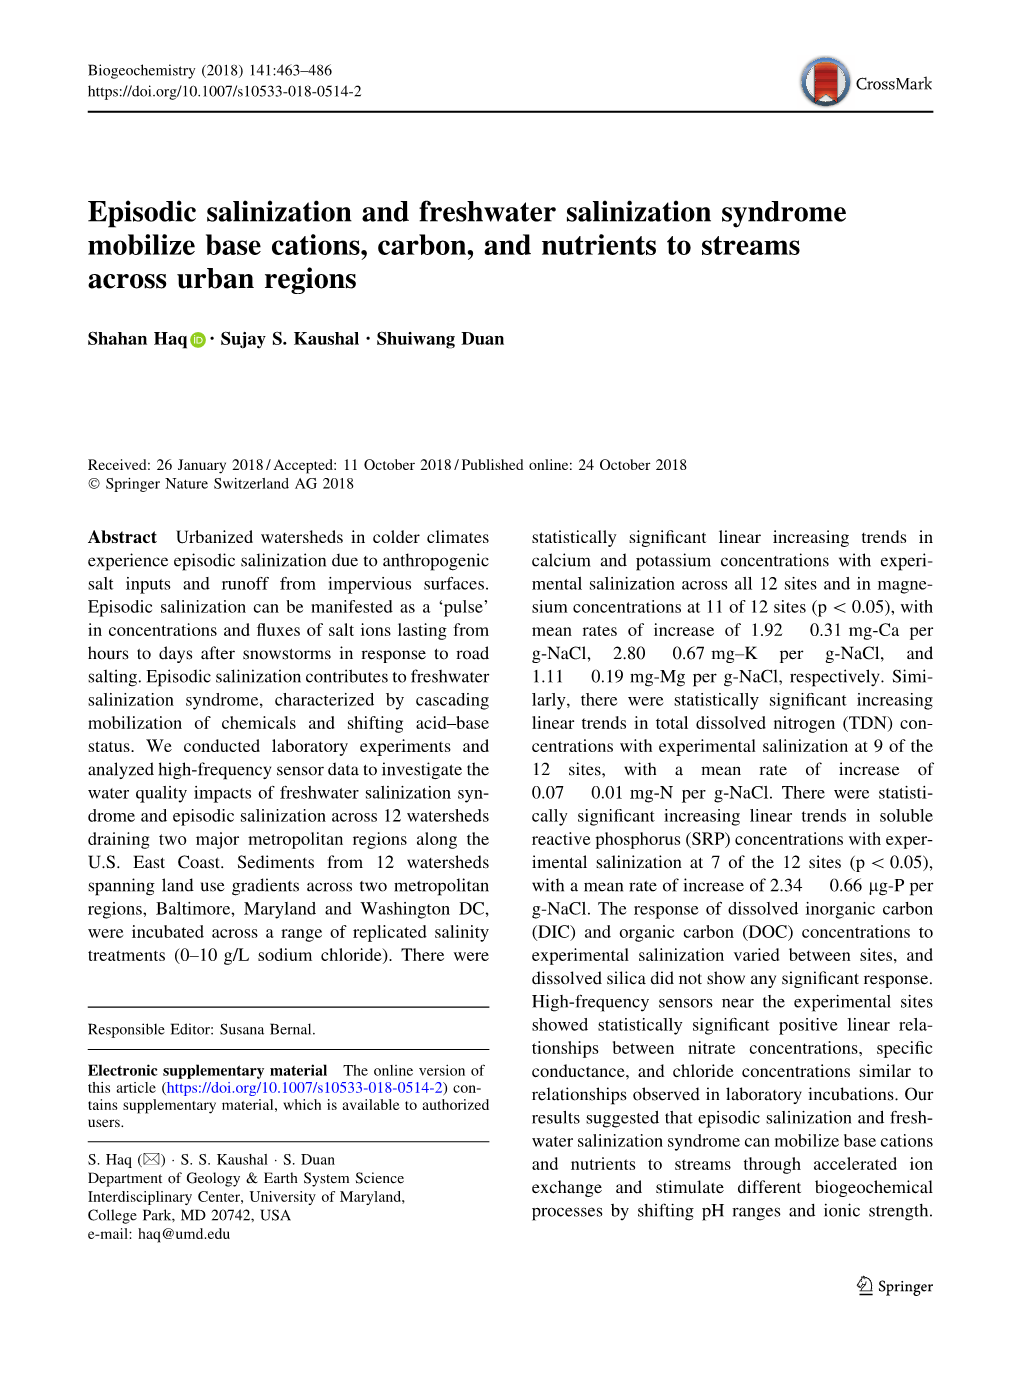 Episodic Salinization and Freshwater Salinization Syndrome Mobilize Base Cations, Carbon, and Nutrients to Streams Across Urban Regions